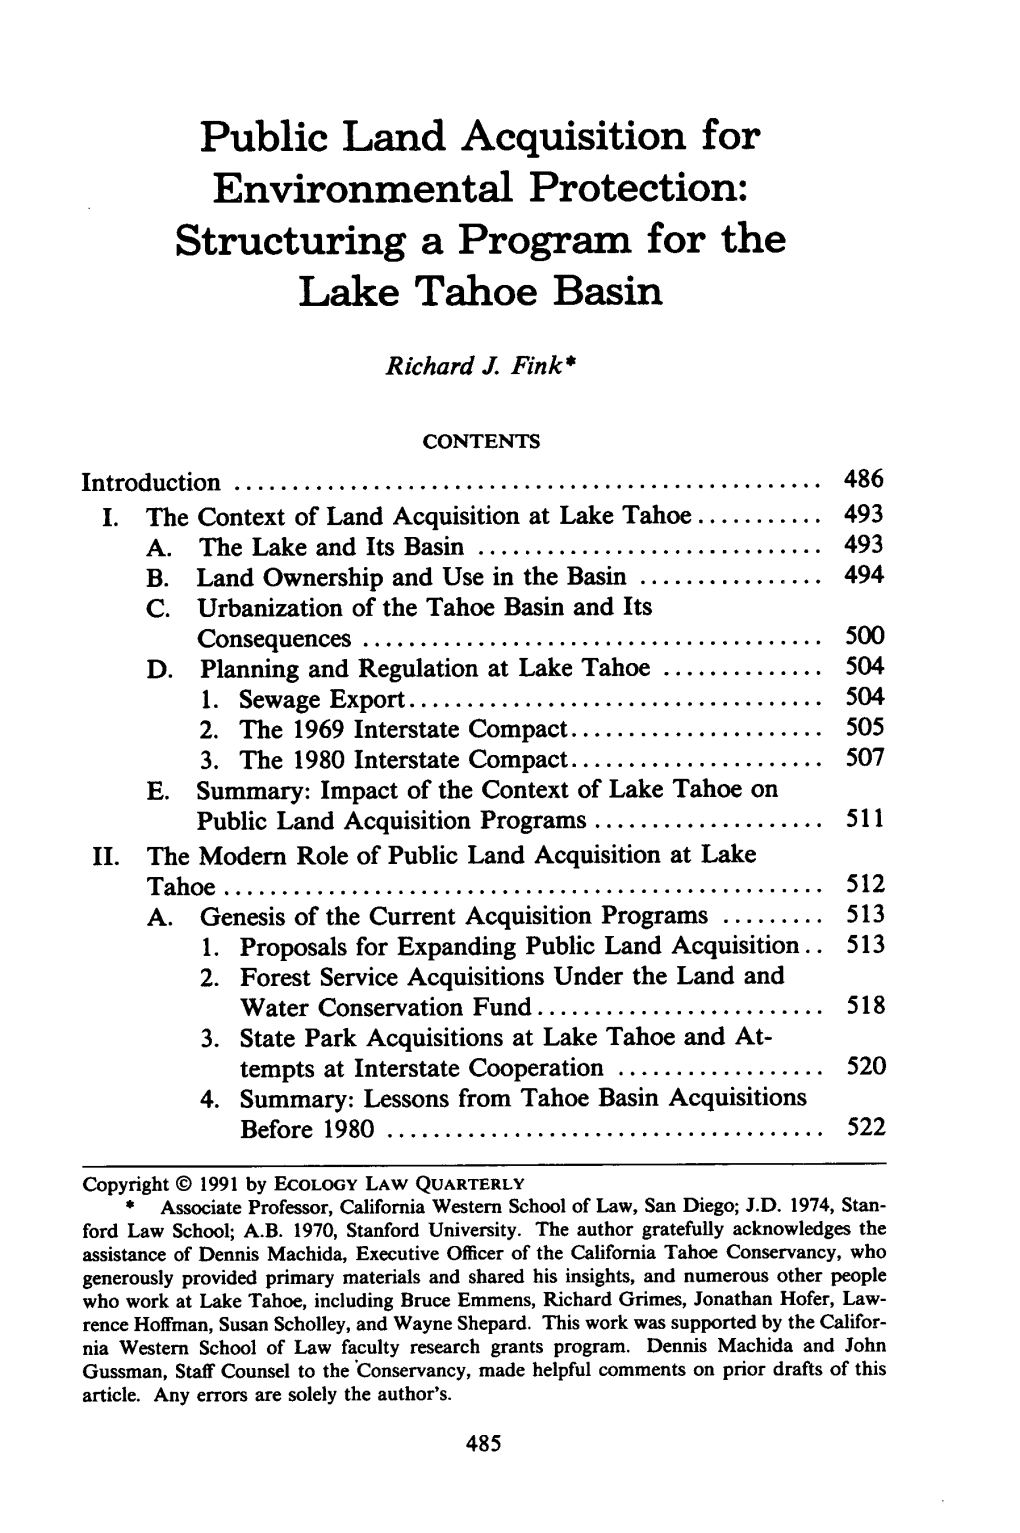 Public Land Acquisition for Environmental Protection: Structuring a Program for the Lake Tahoe Basin